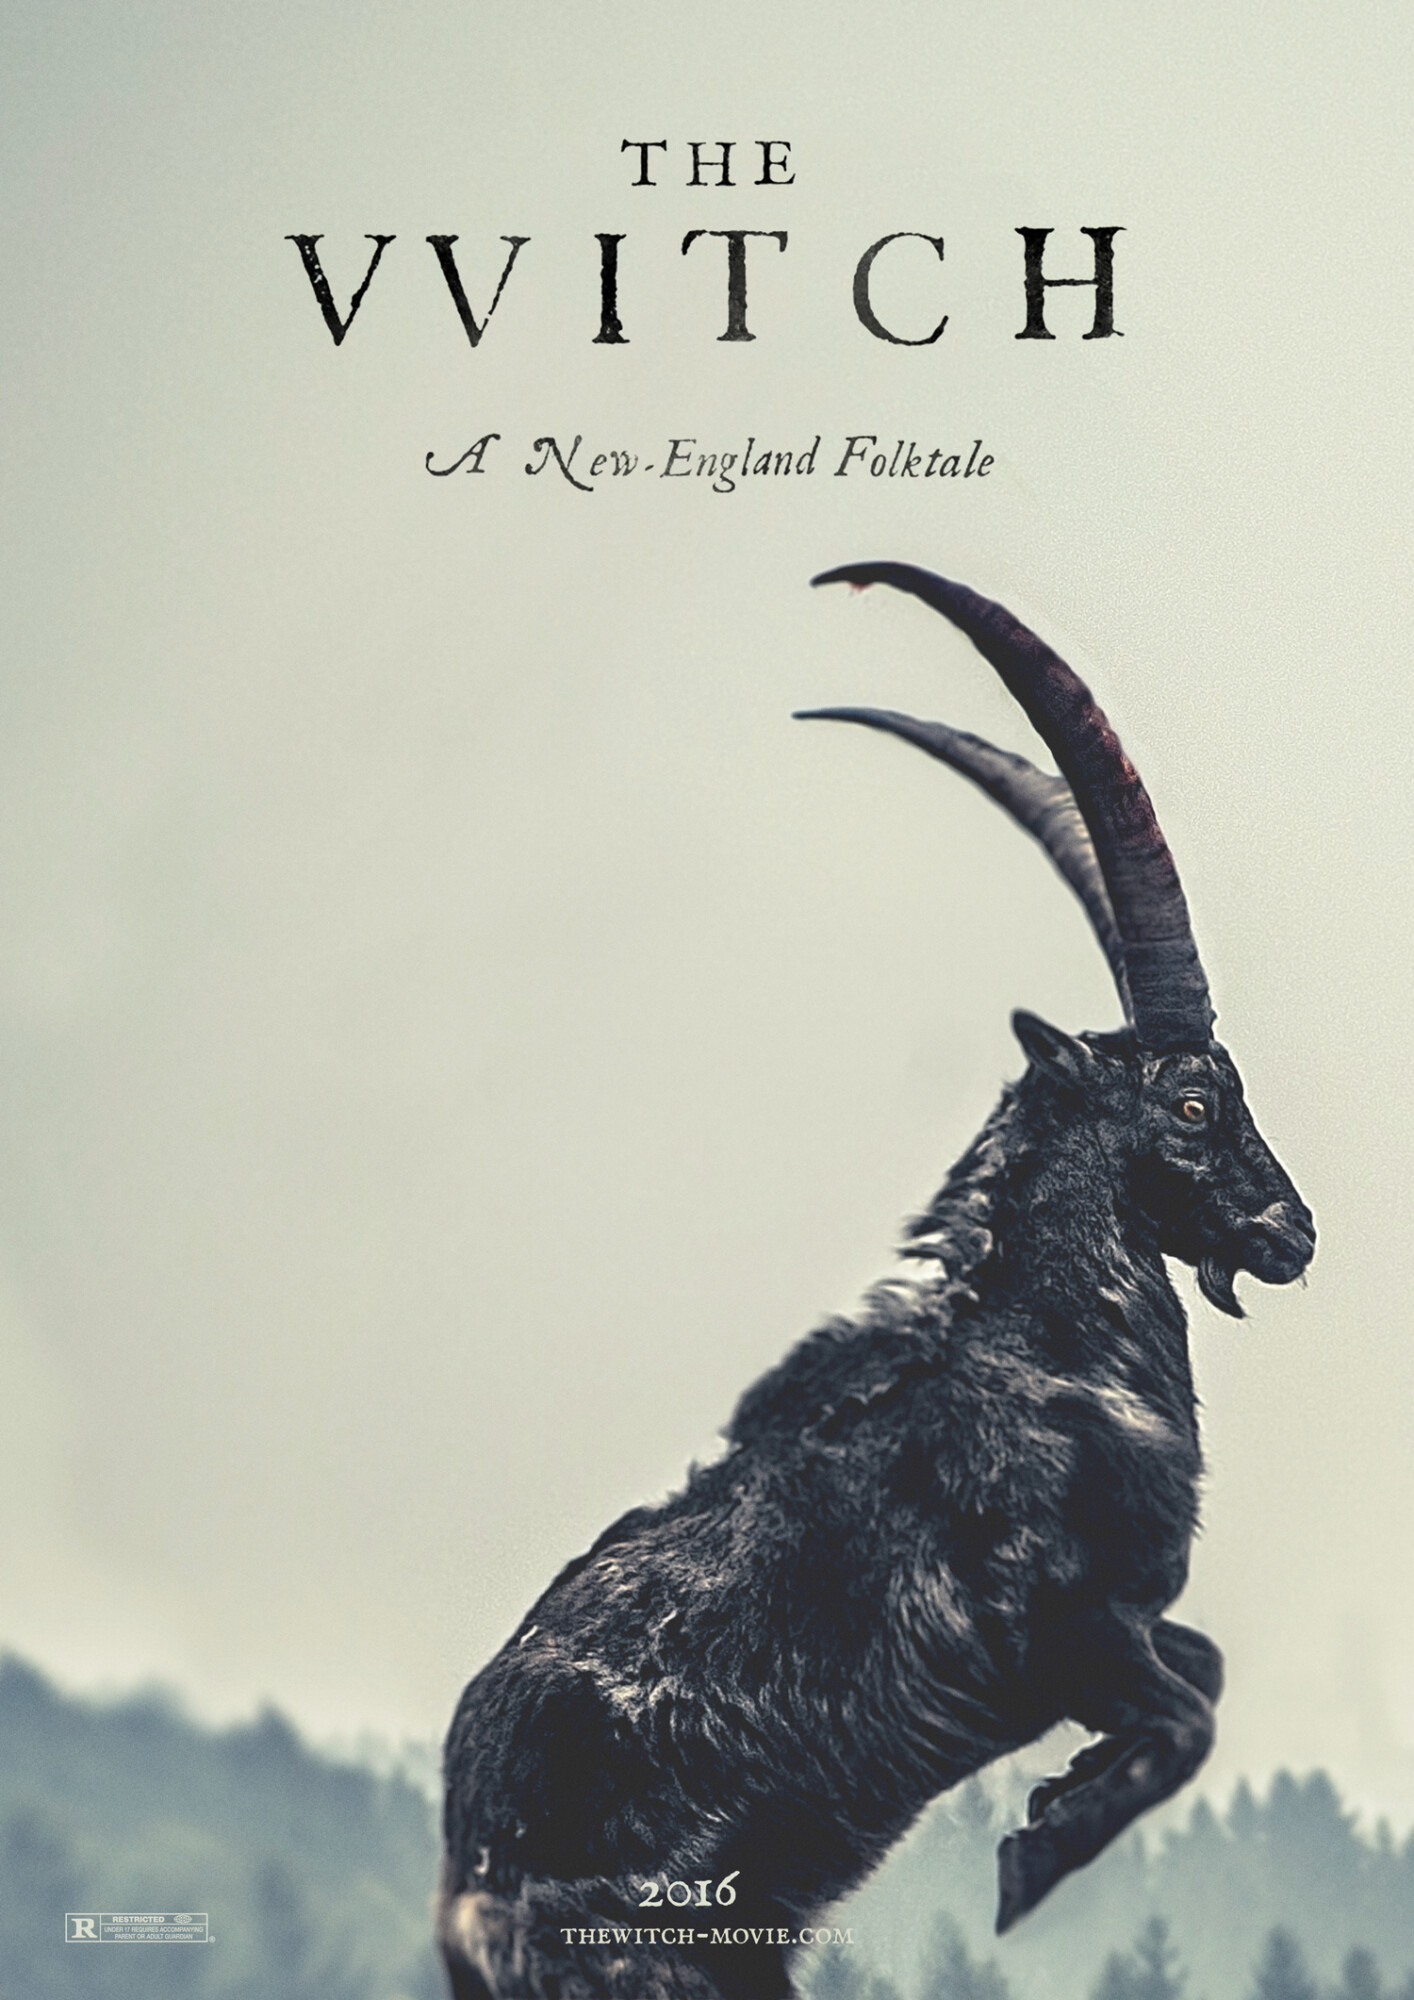 vvitch posterspy tter rry